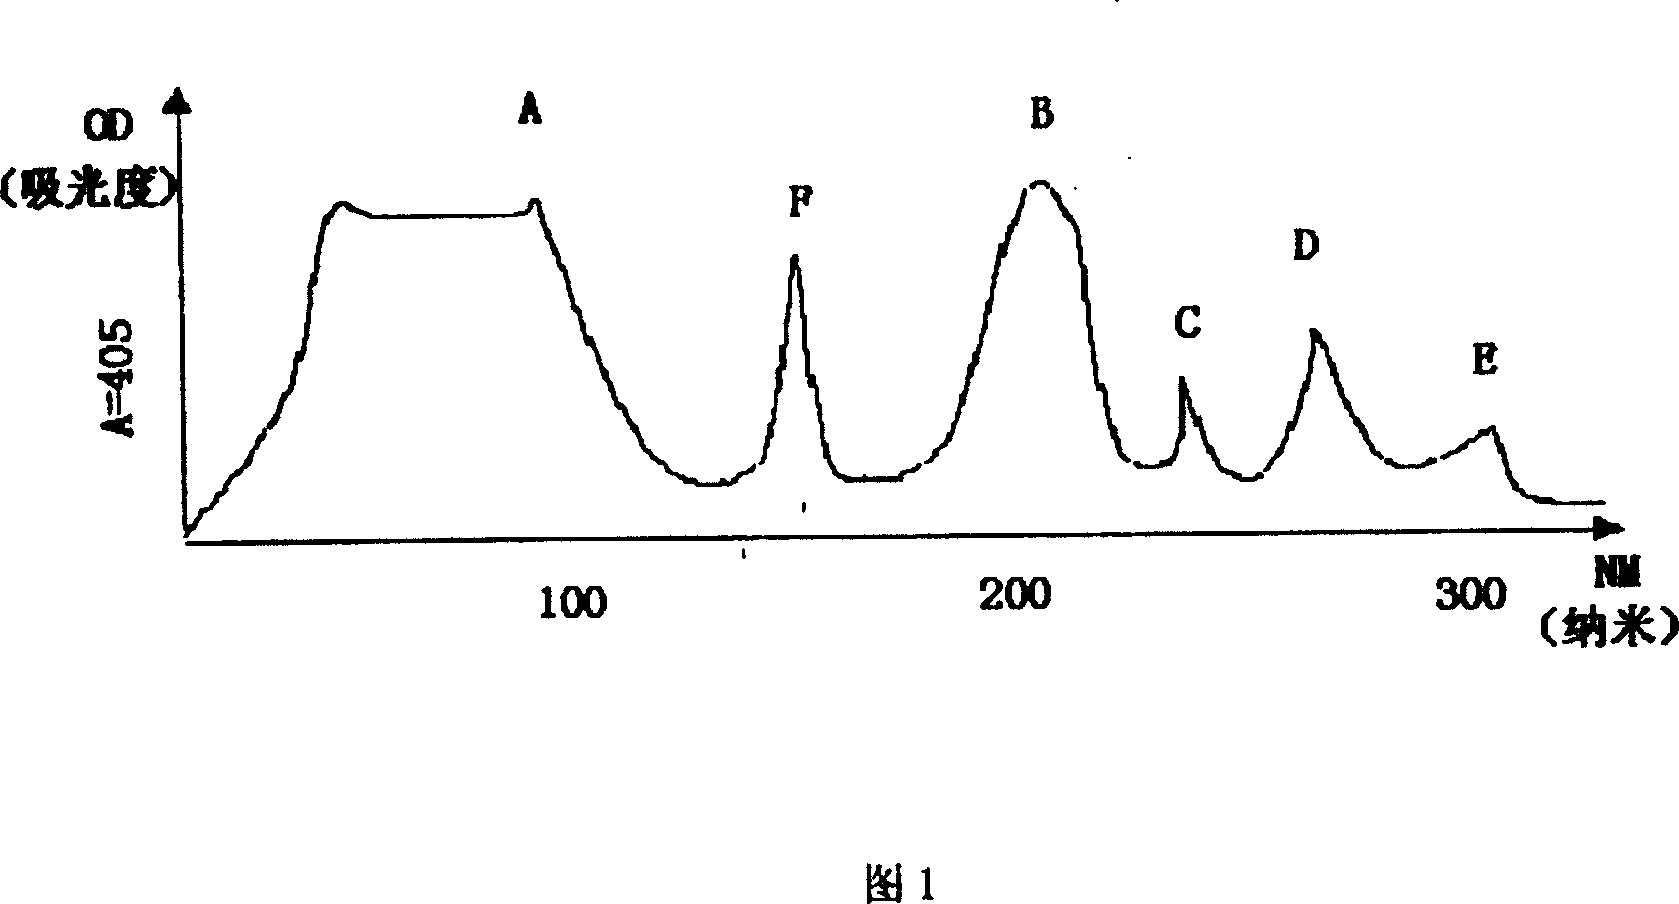 Process for preparing anti-interference horseshoe crab agent